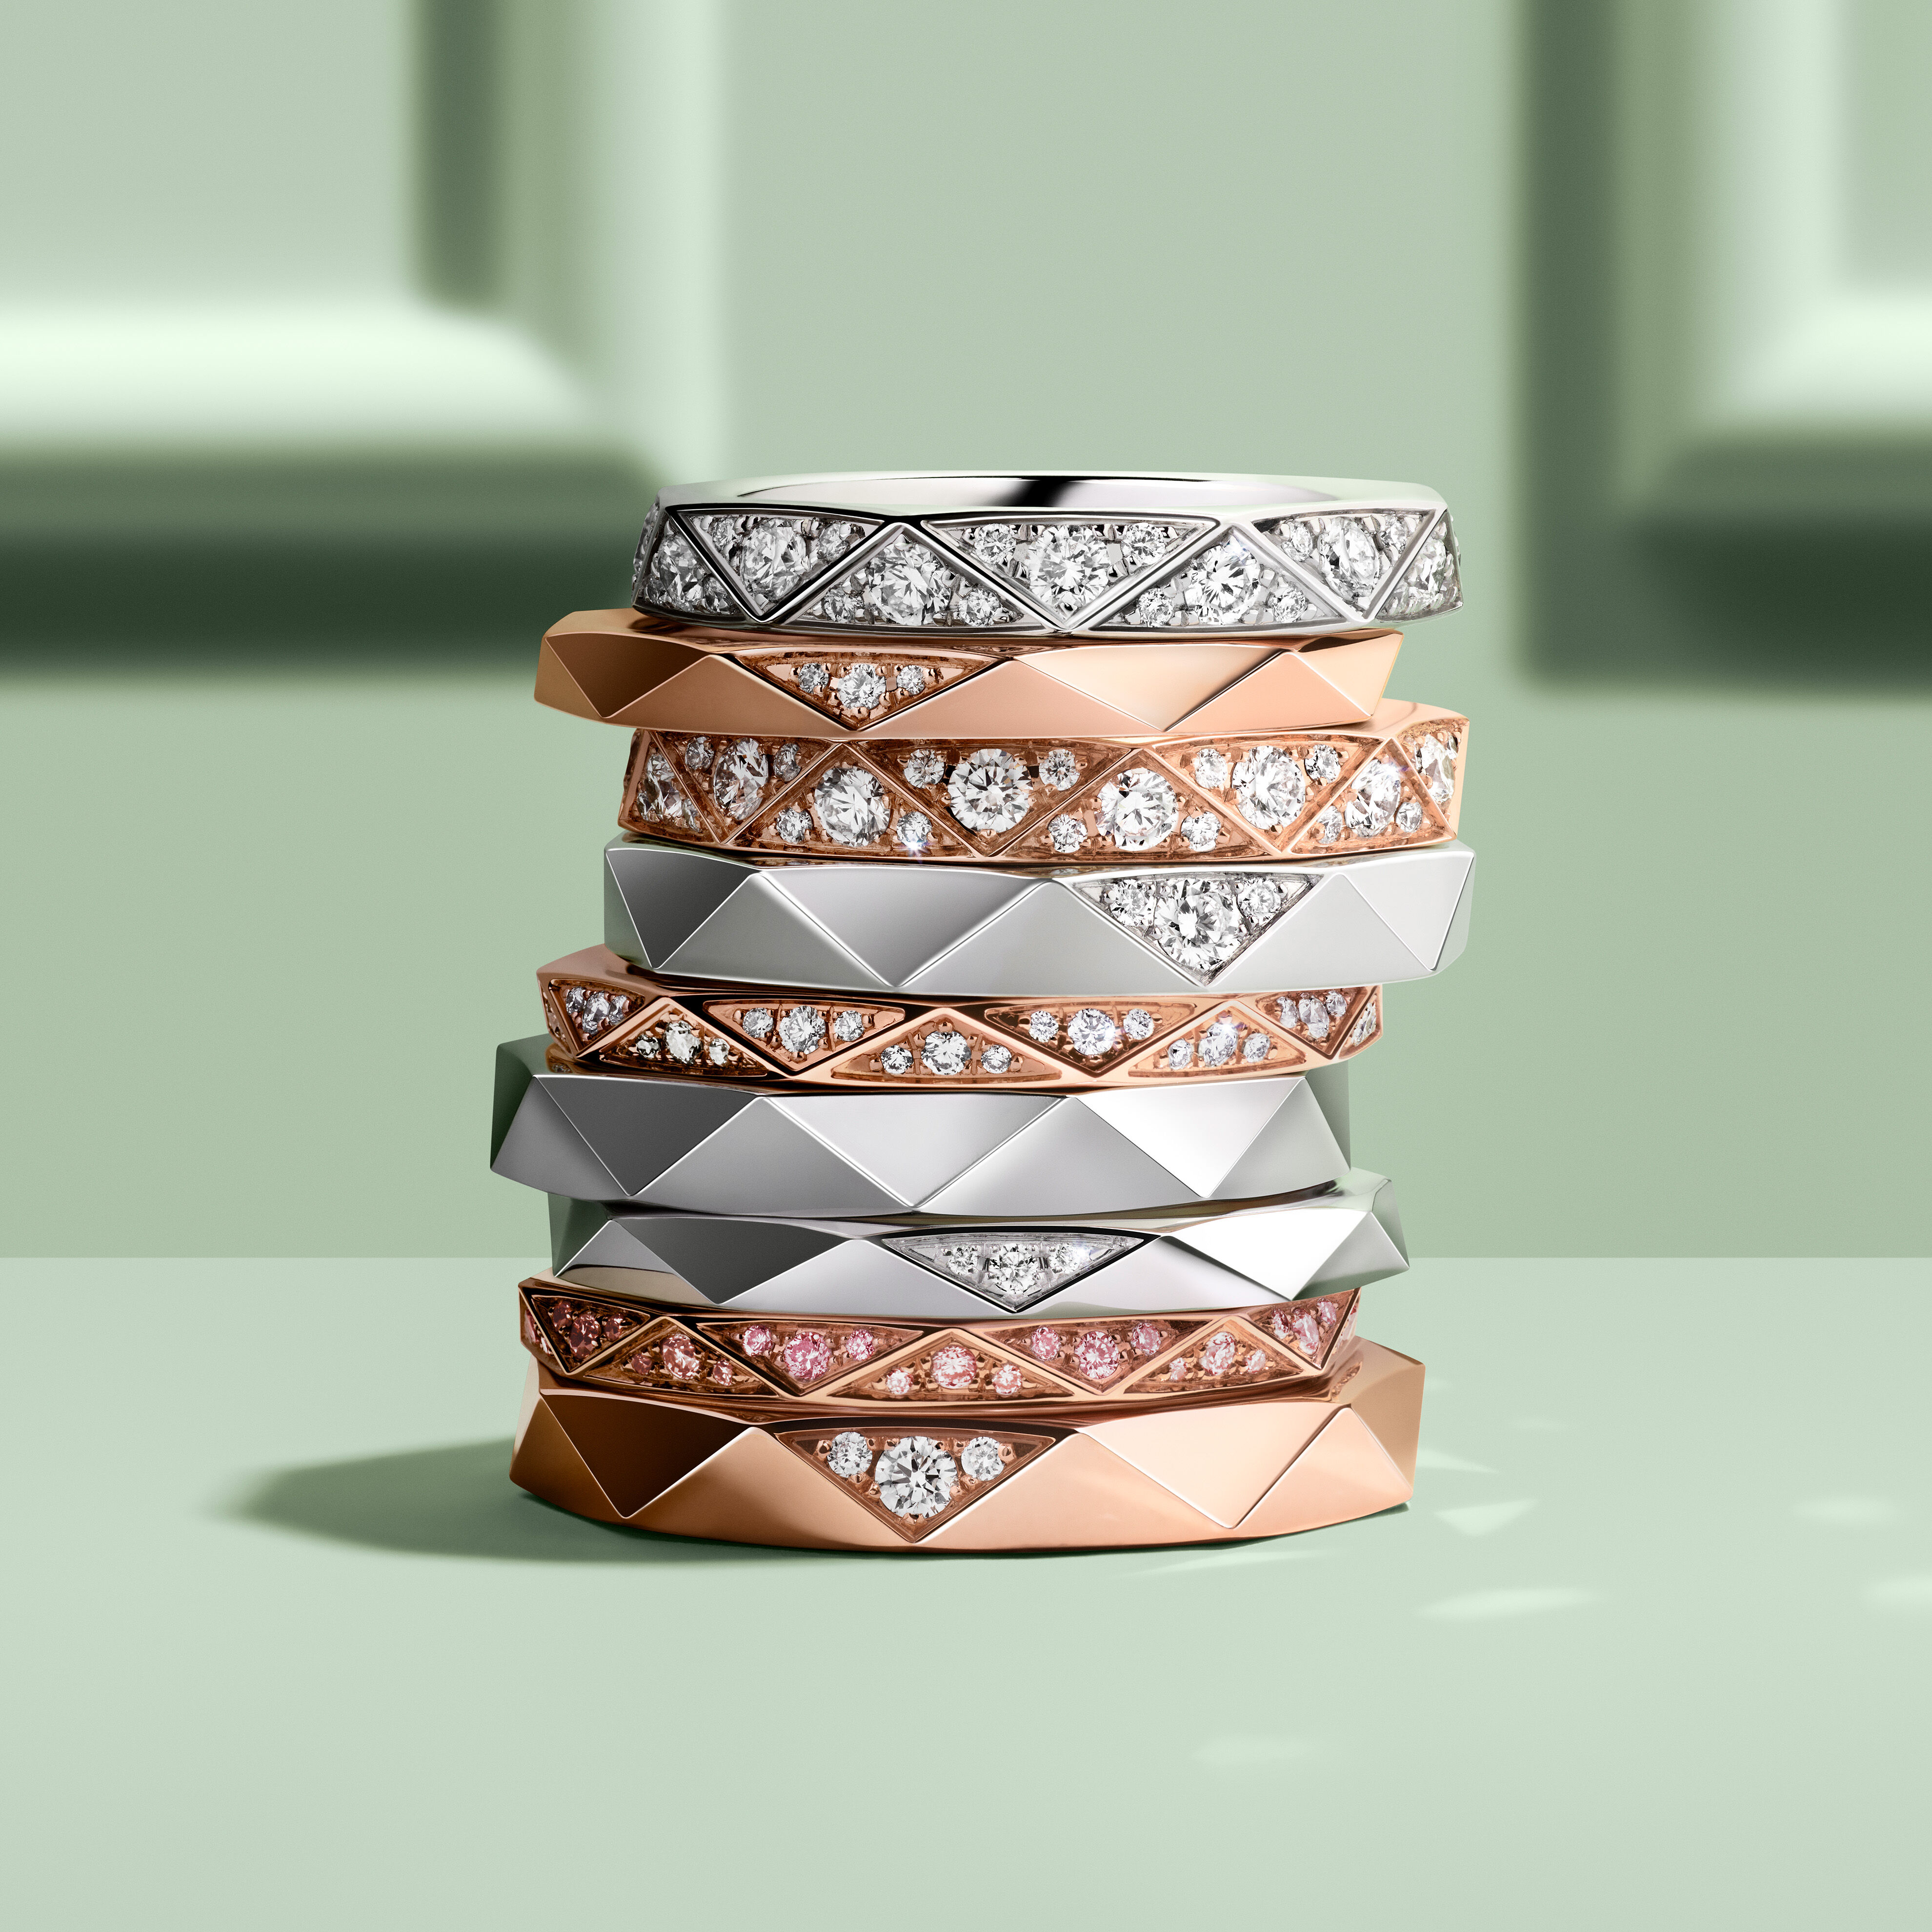 Image of Laurence Graff Signature collection rings